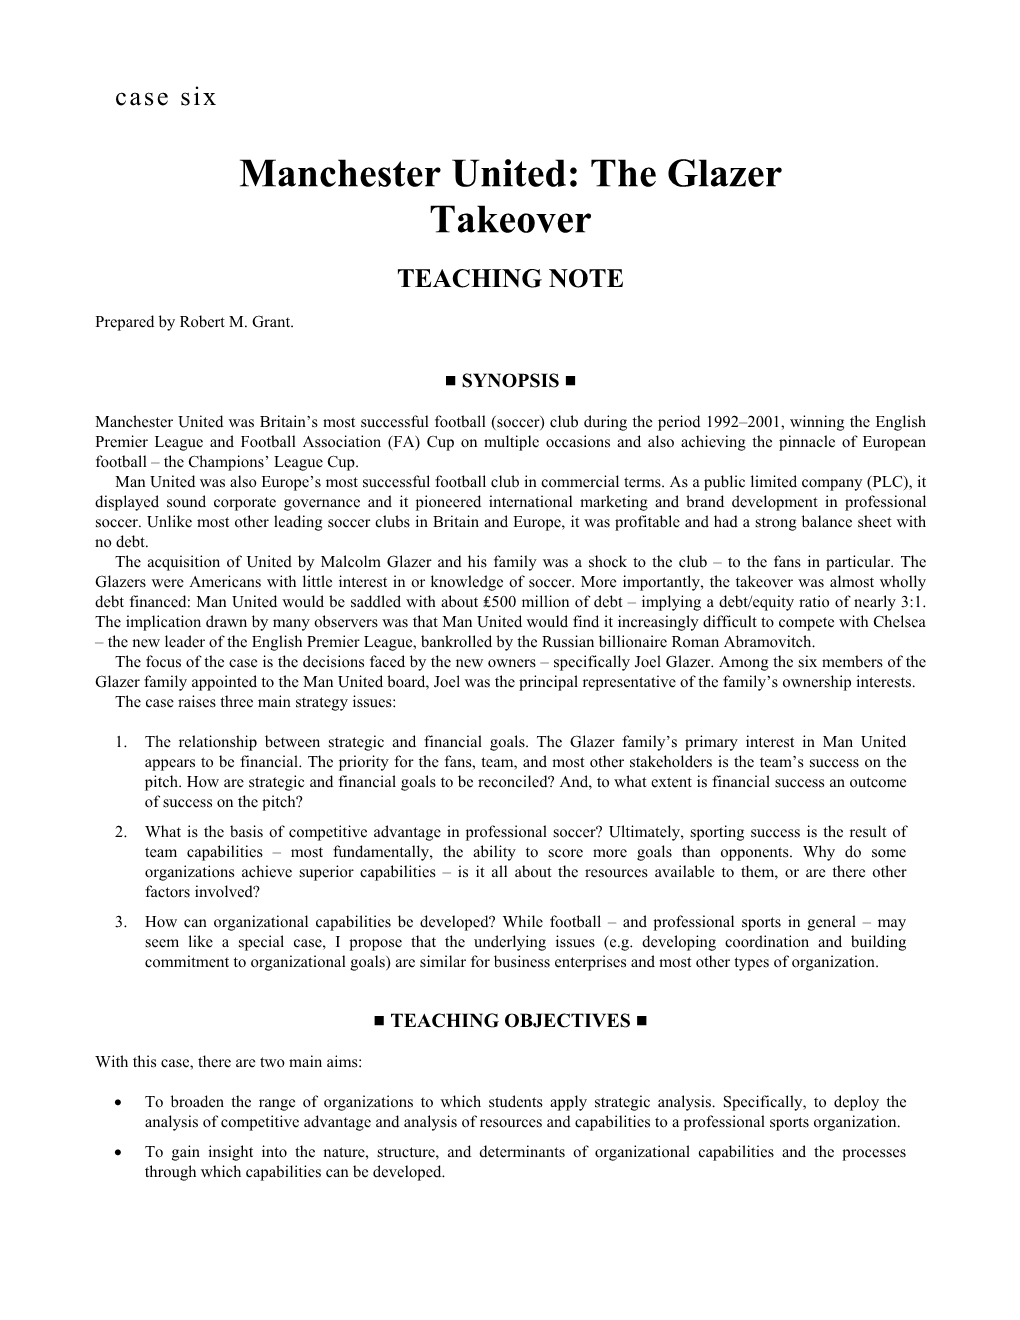 Manchester United: the Glazer Takeover TEACHING NOTE